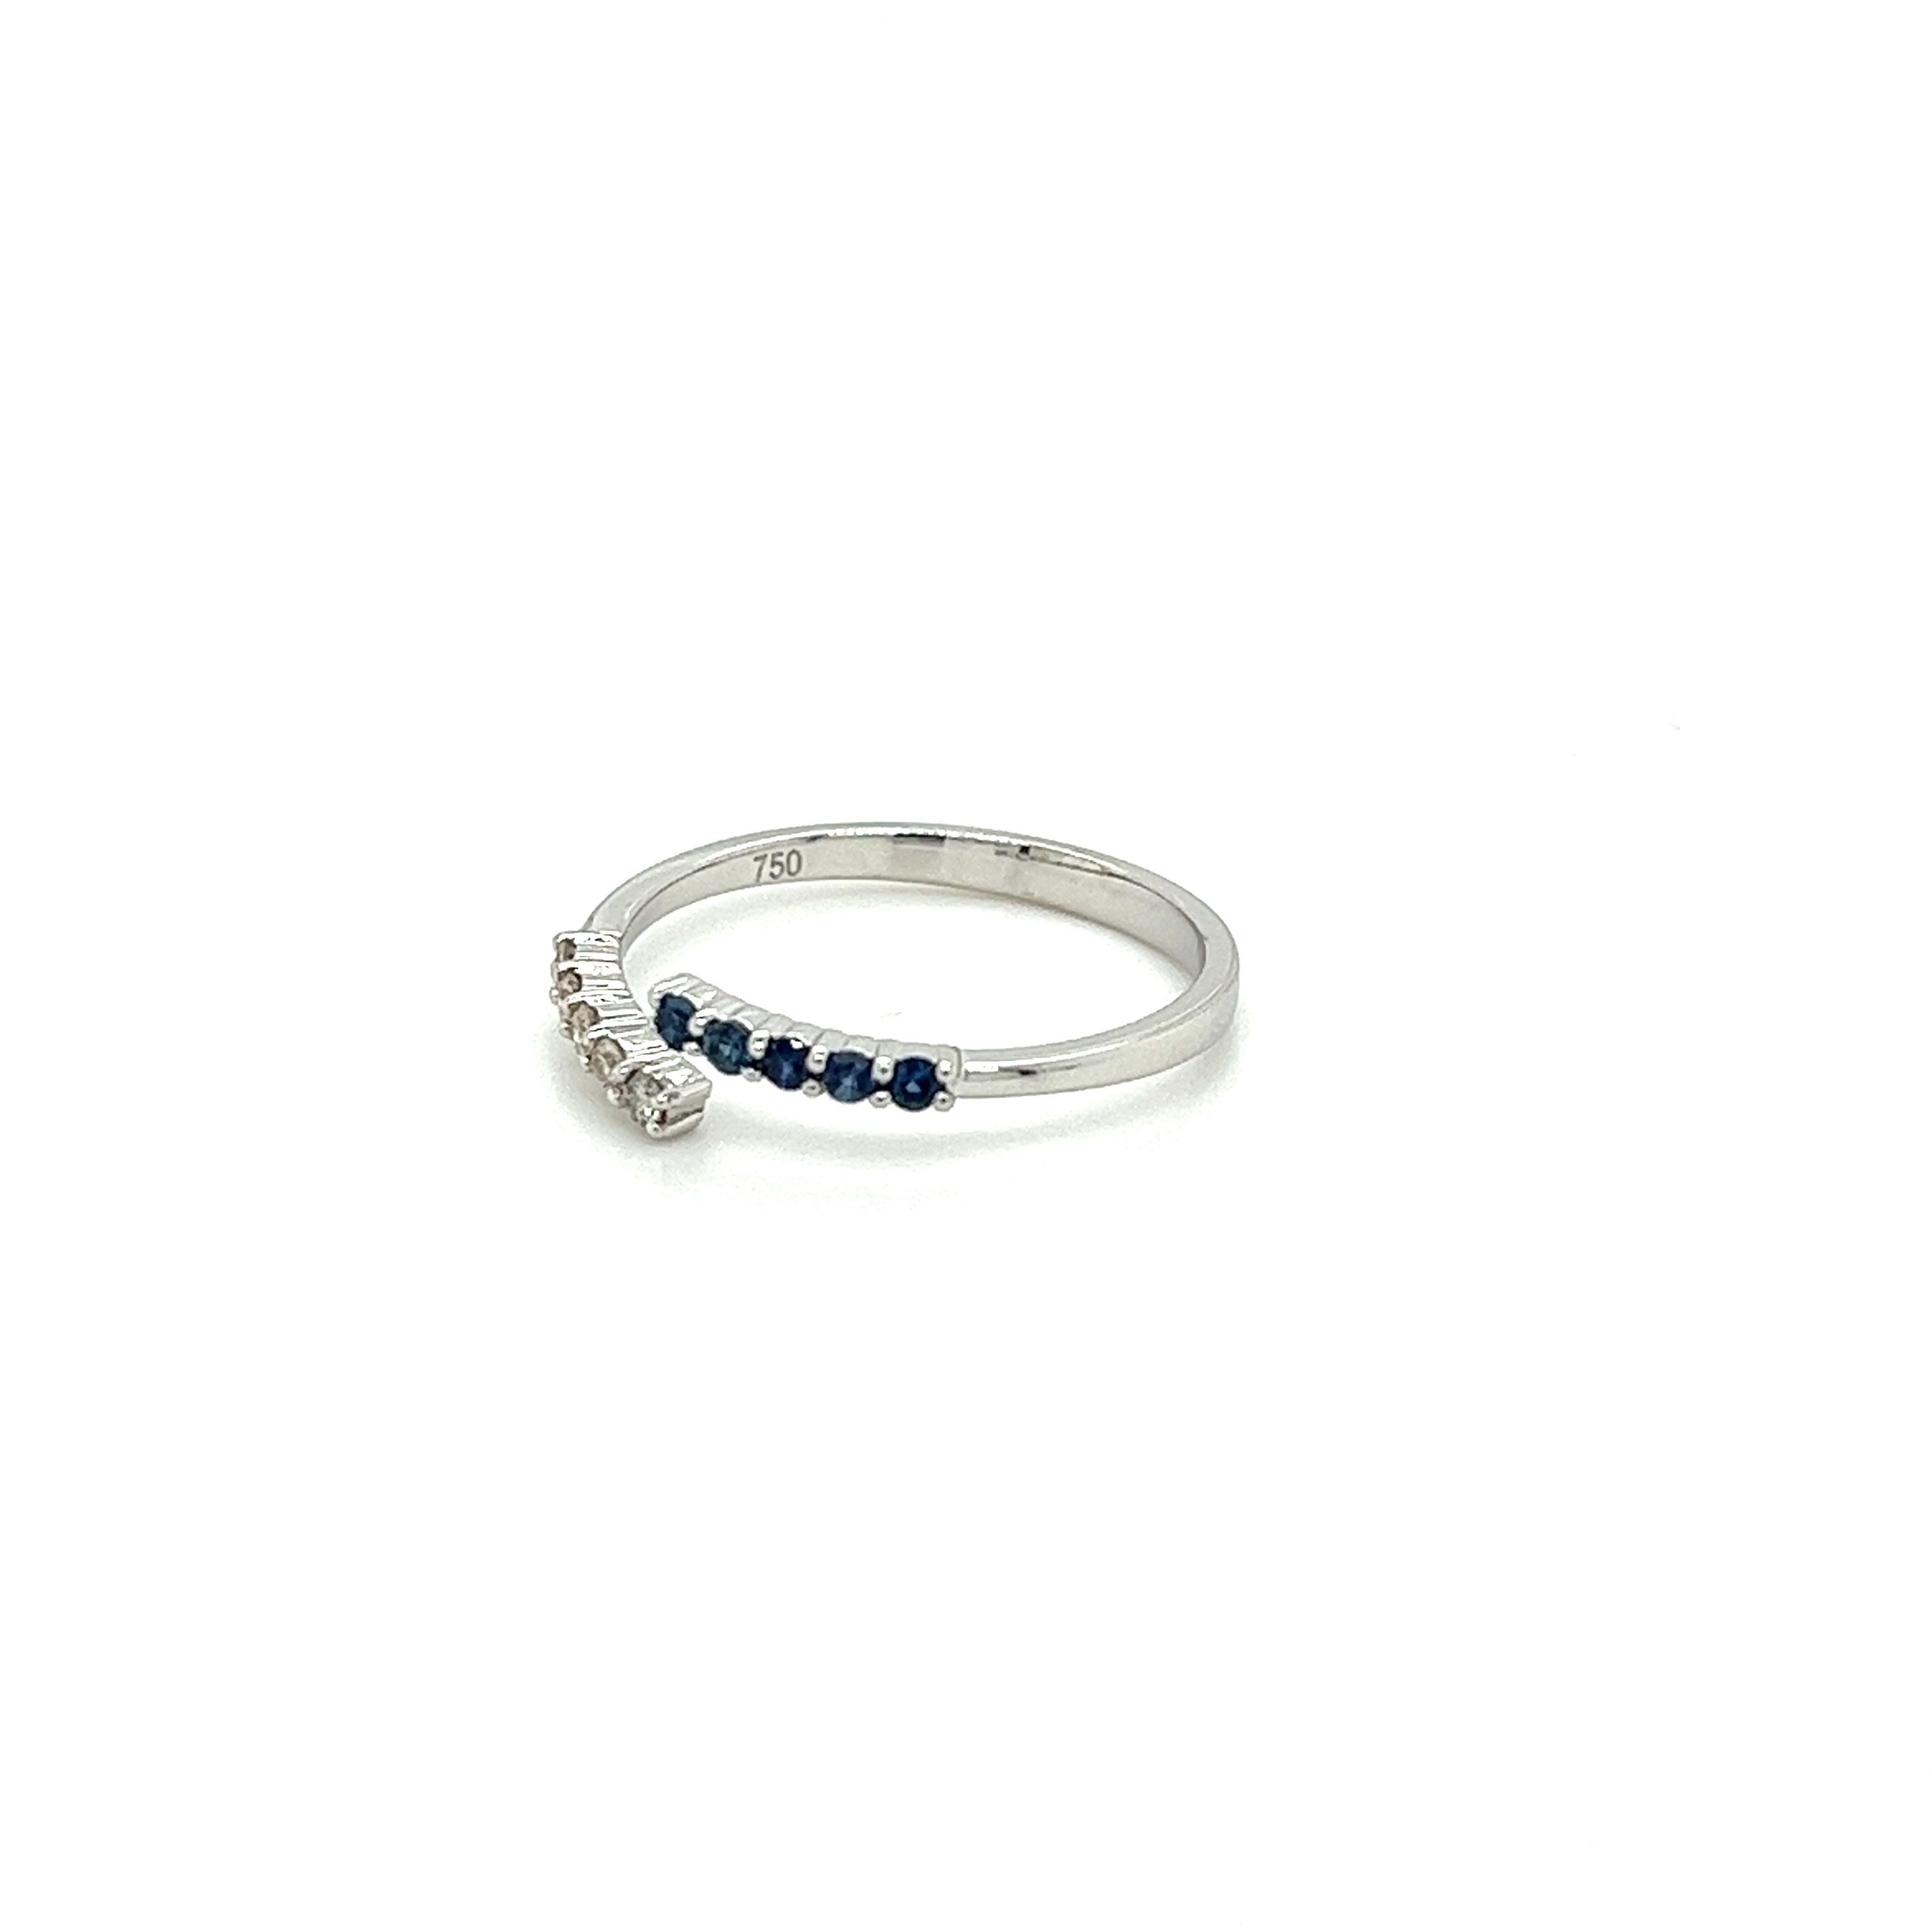 Cute, dainty, and stackable 18-karat solid white gold crossover bypass ring. Set with 10 round-cut natural Blue Sapphires and Diamonds. Hypoallergenic and 100% waterproof. Ideal for daily wear.

The perfect fine jewelry gift that doesn't break the